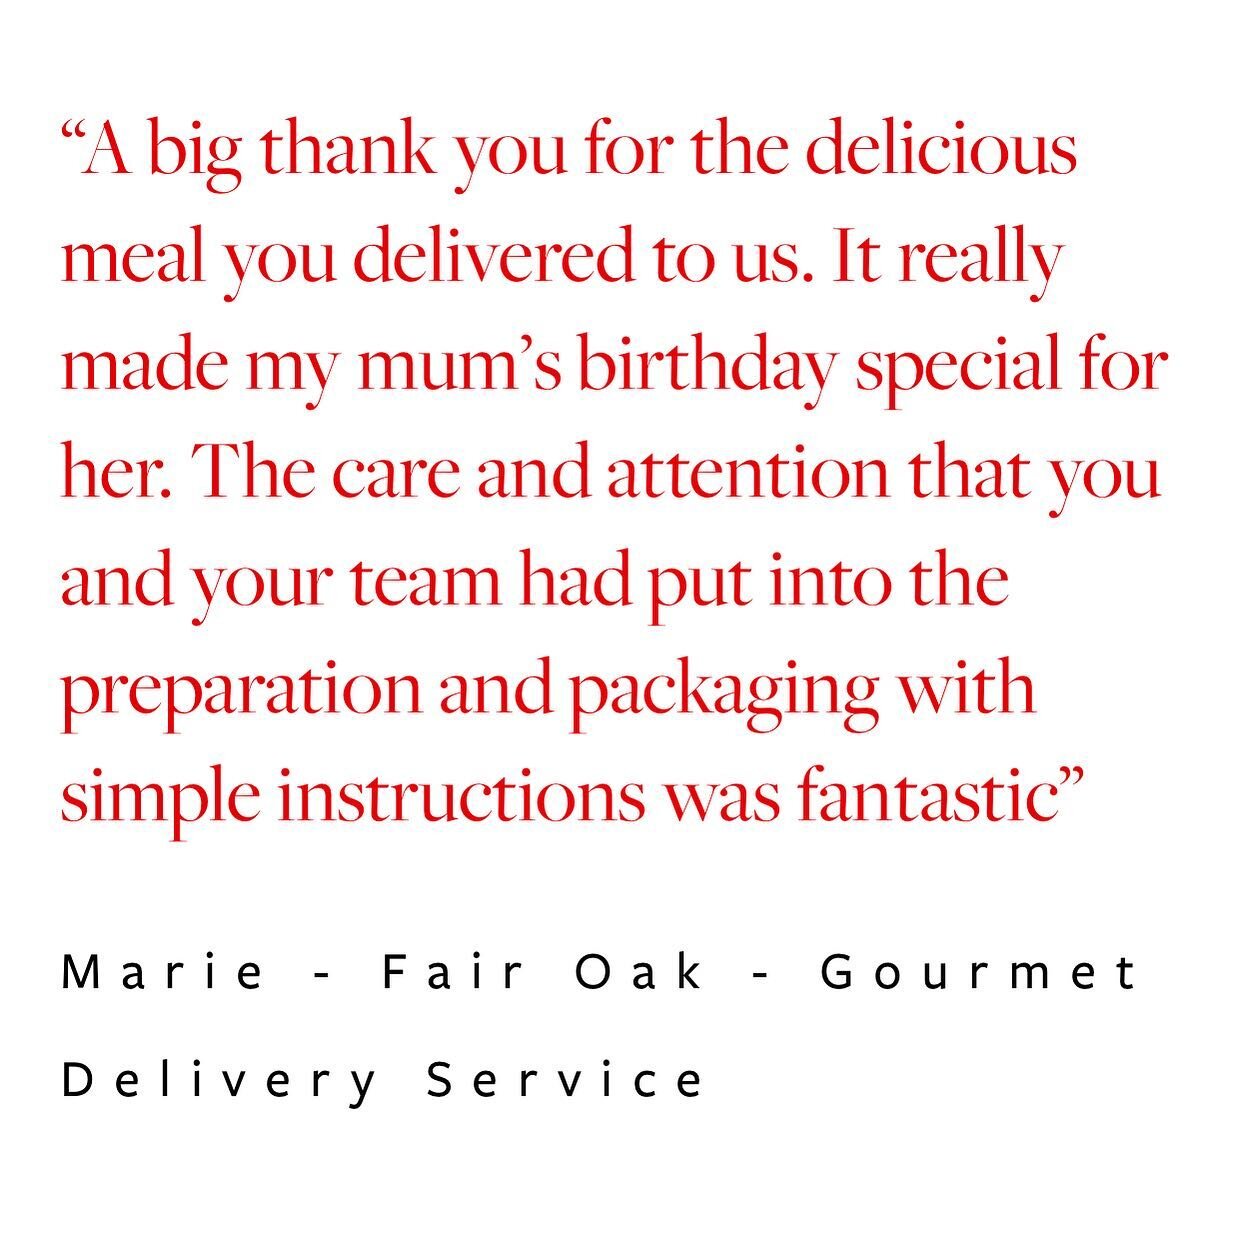 Another lovely review following our delivery service this weekend #privatechef #gourmetcatering #hampshirechef #dinnerparty #specialocassion #dorsetchef #dinnerparty #delivery #gourmetdining #homechef #delivery #hampshire #winchester #newforest